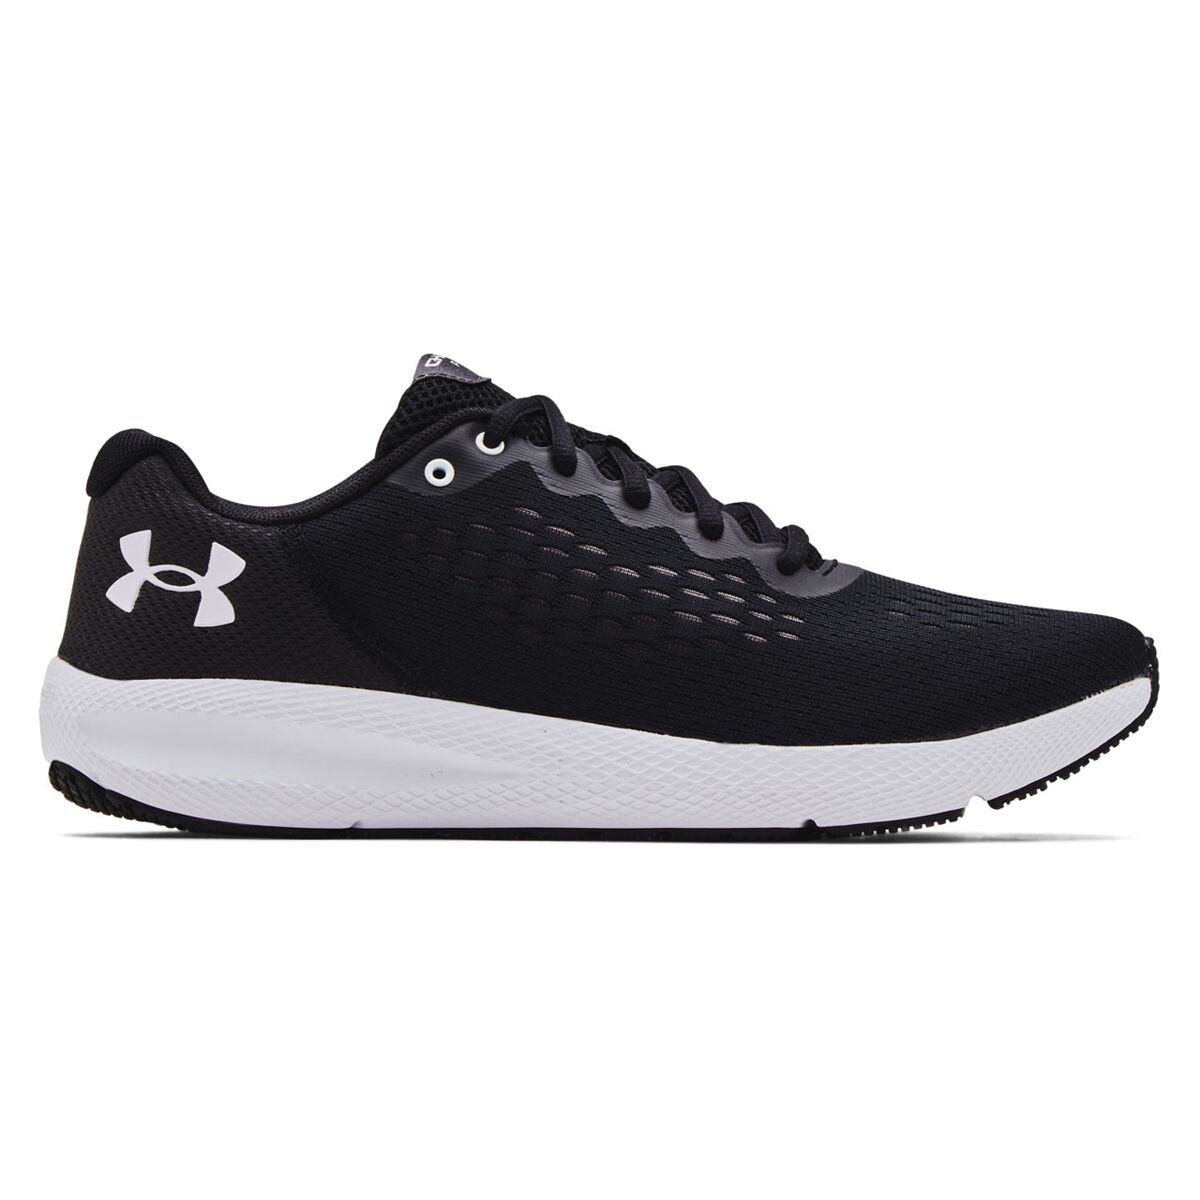 Under Armour Charged Pursuit 2 Mens